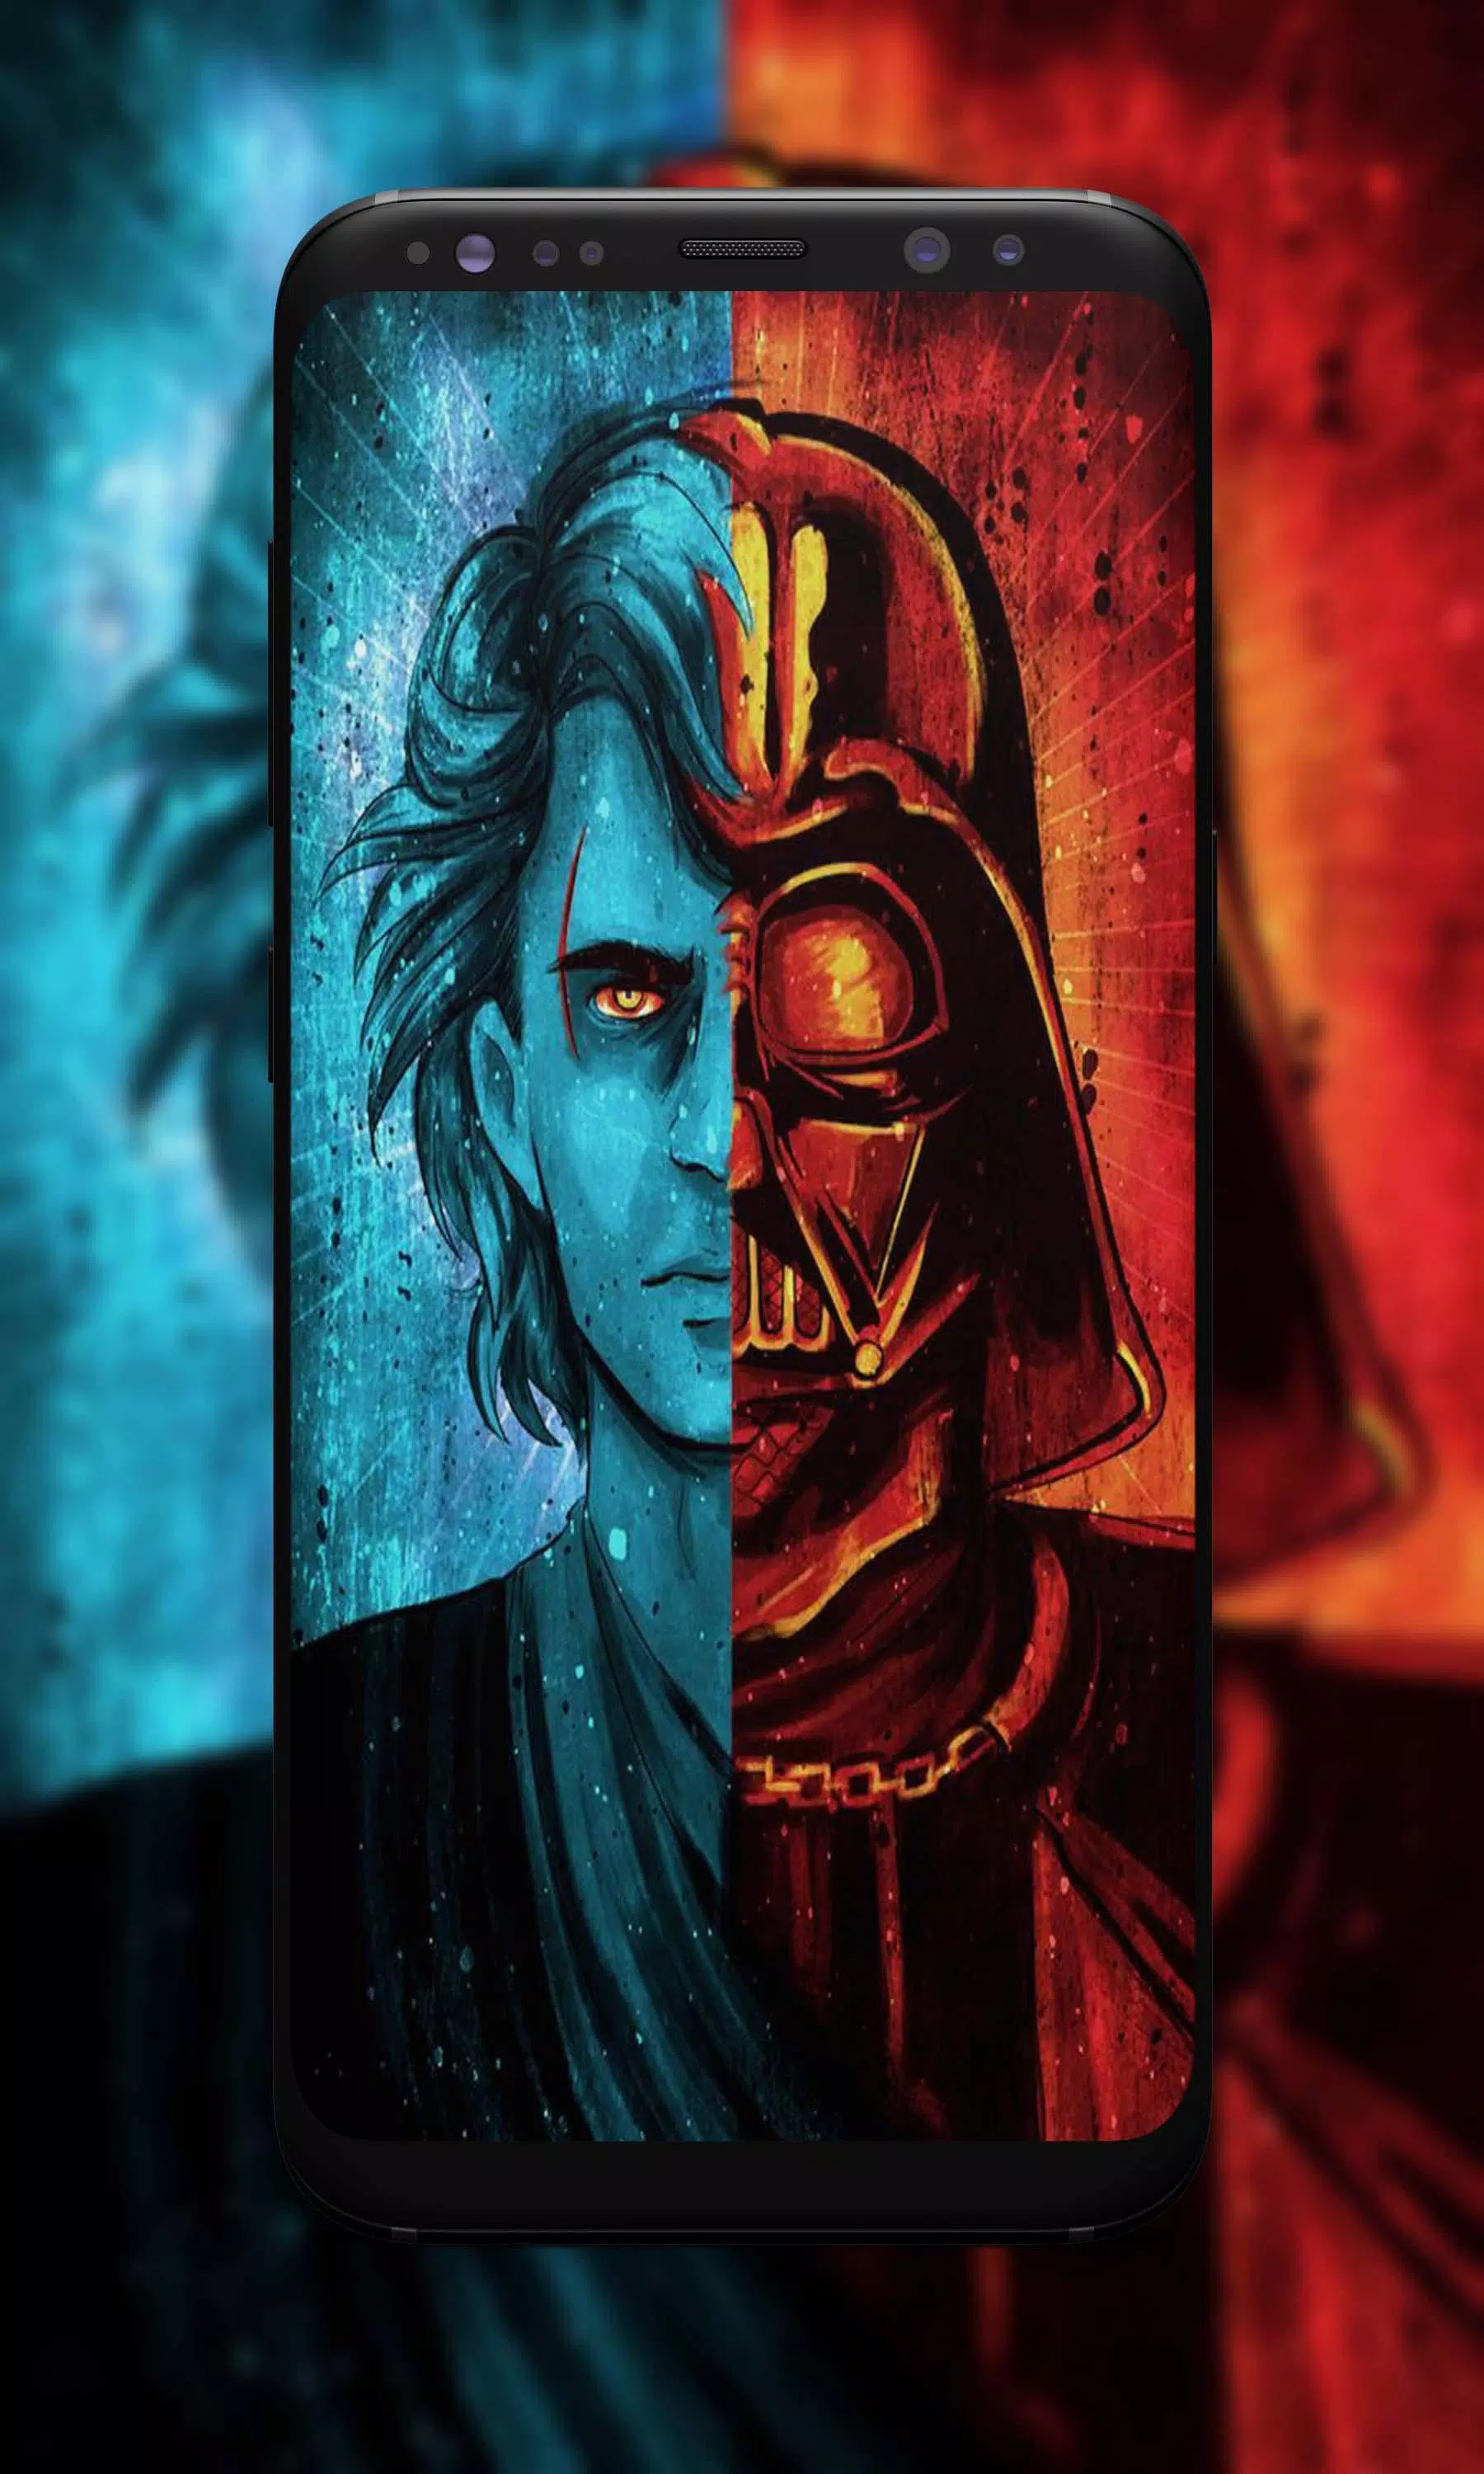 Starwars wallpaper hd apk for android download